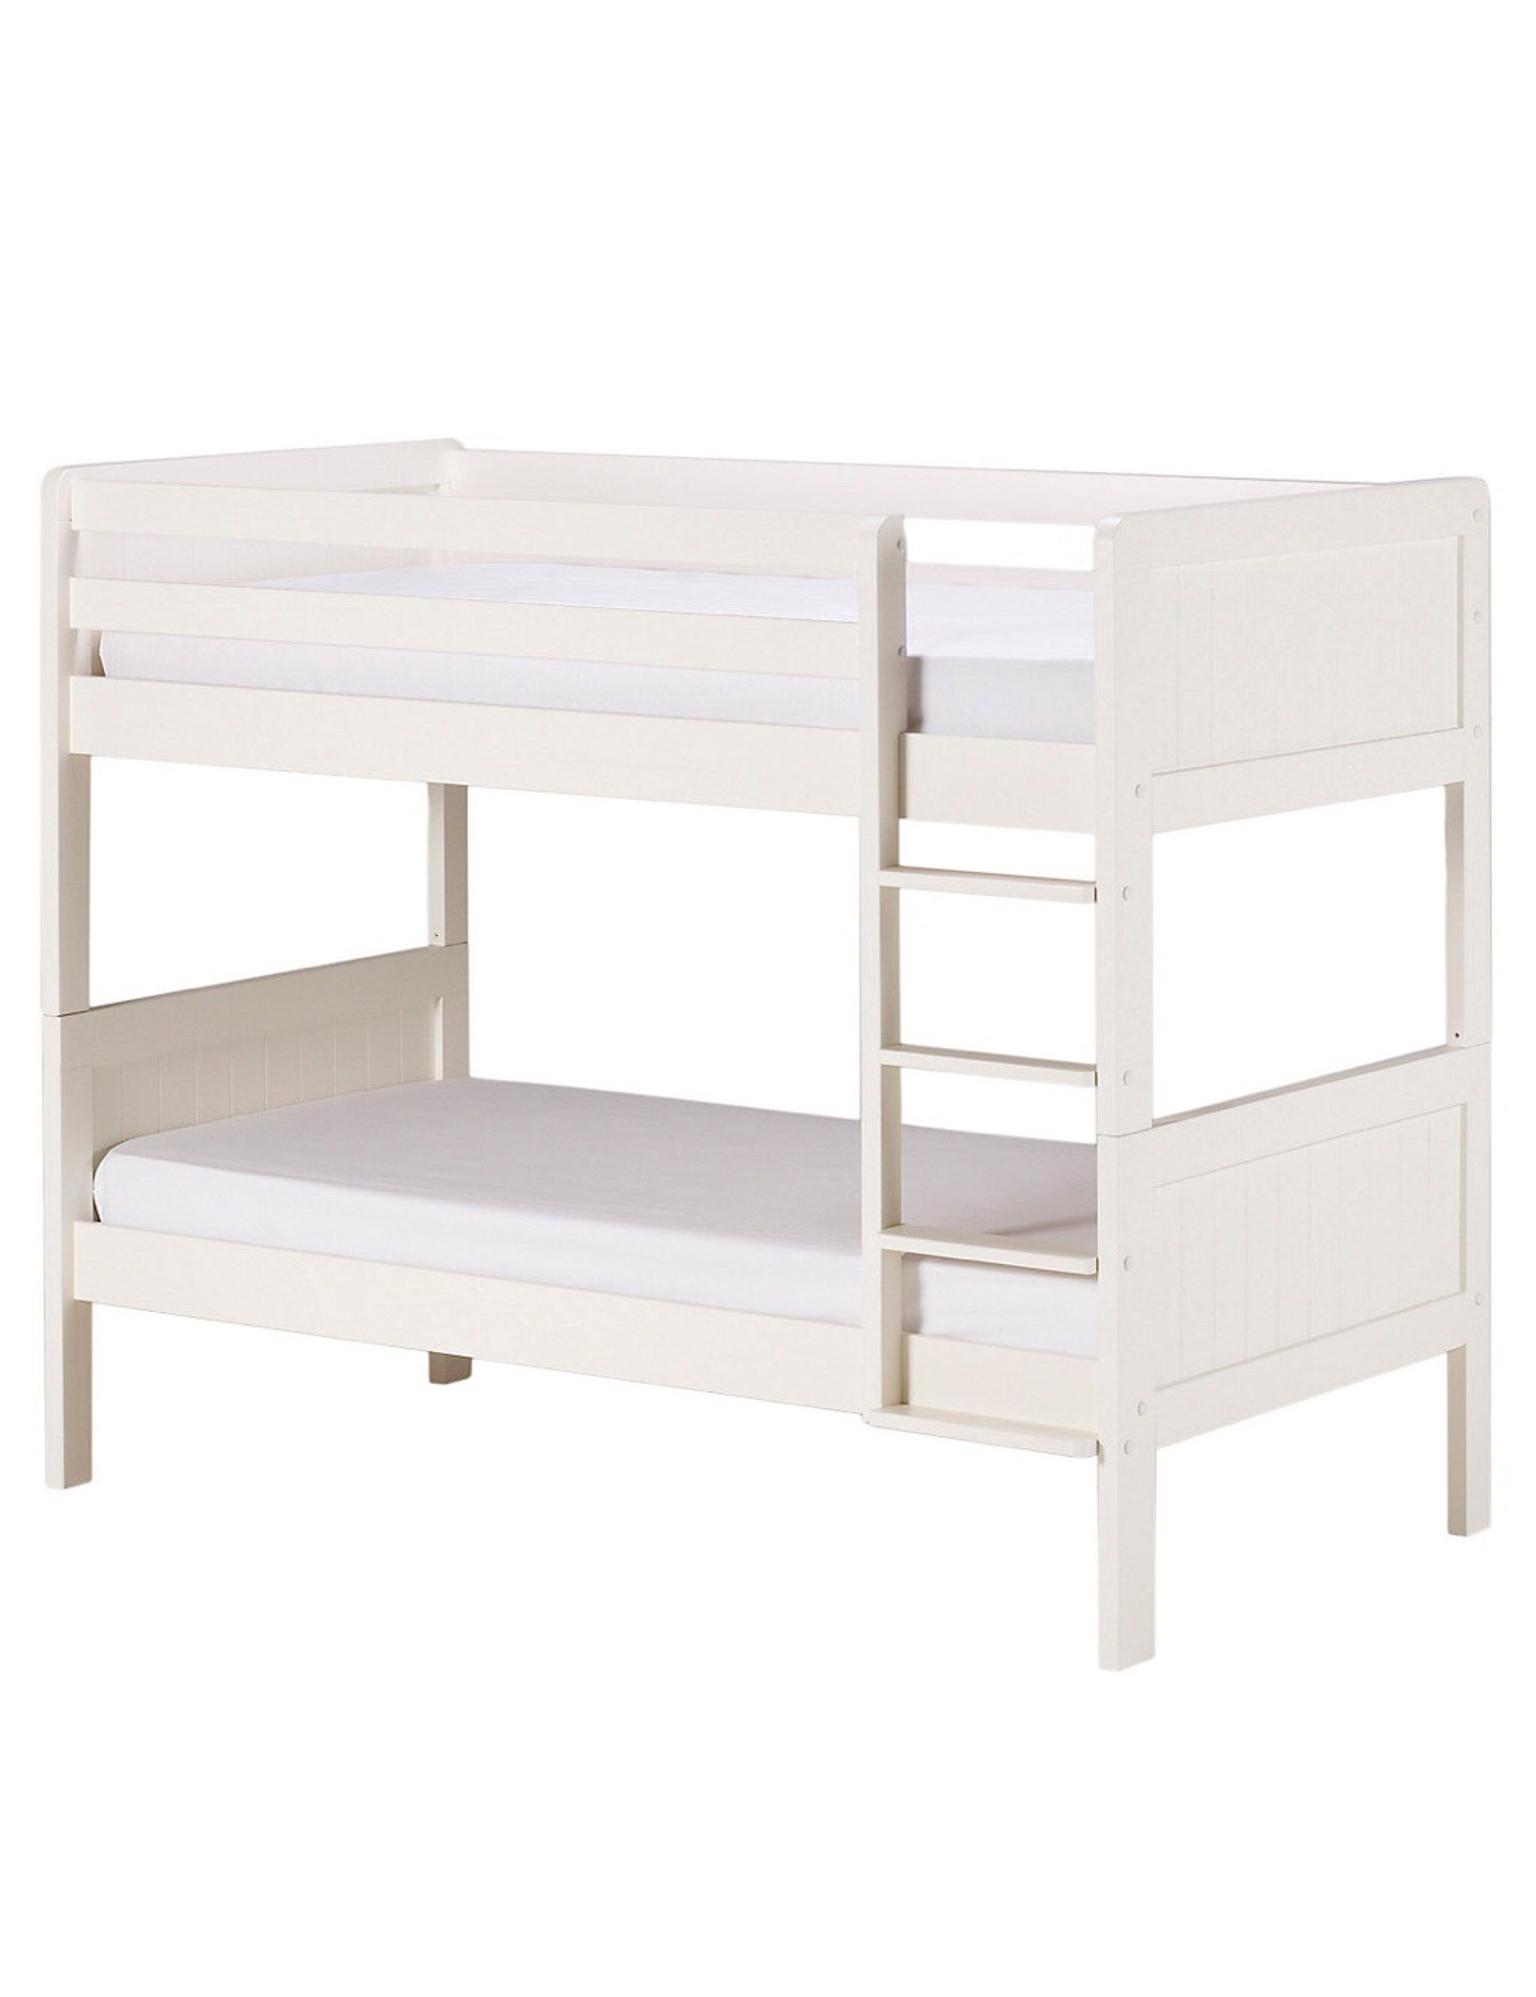 M S Hastings Bunk Bed Ivory In Ss12, Ivory Bunk Beds